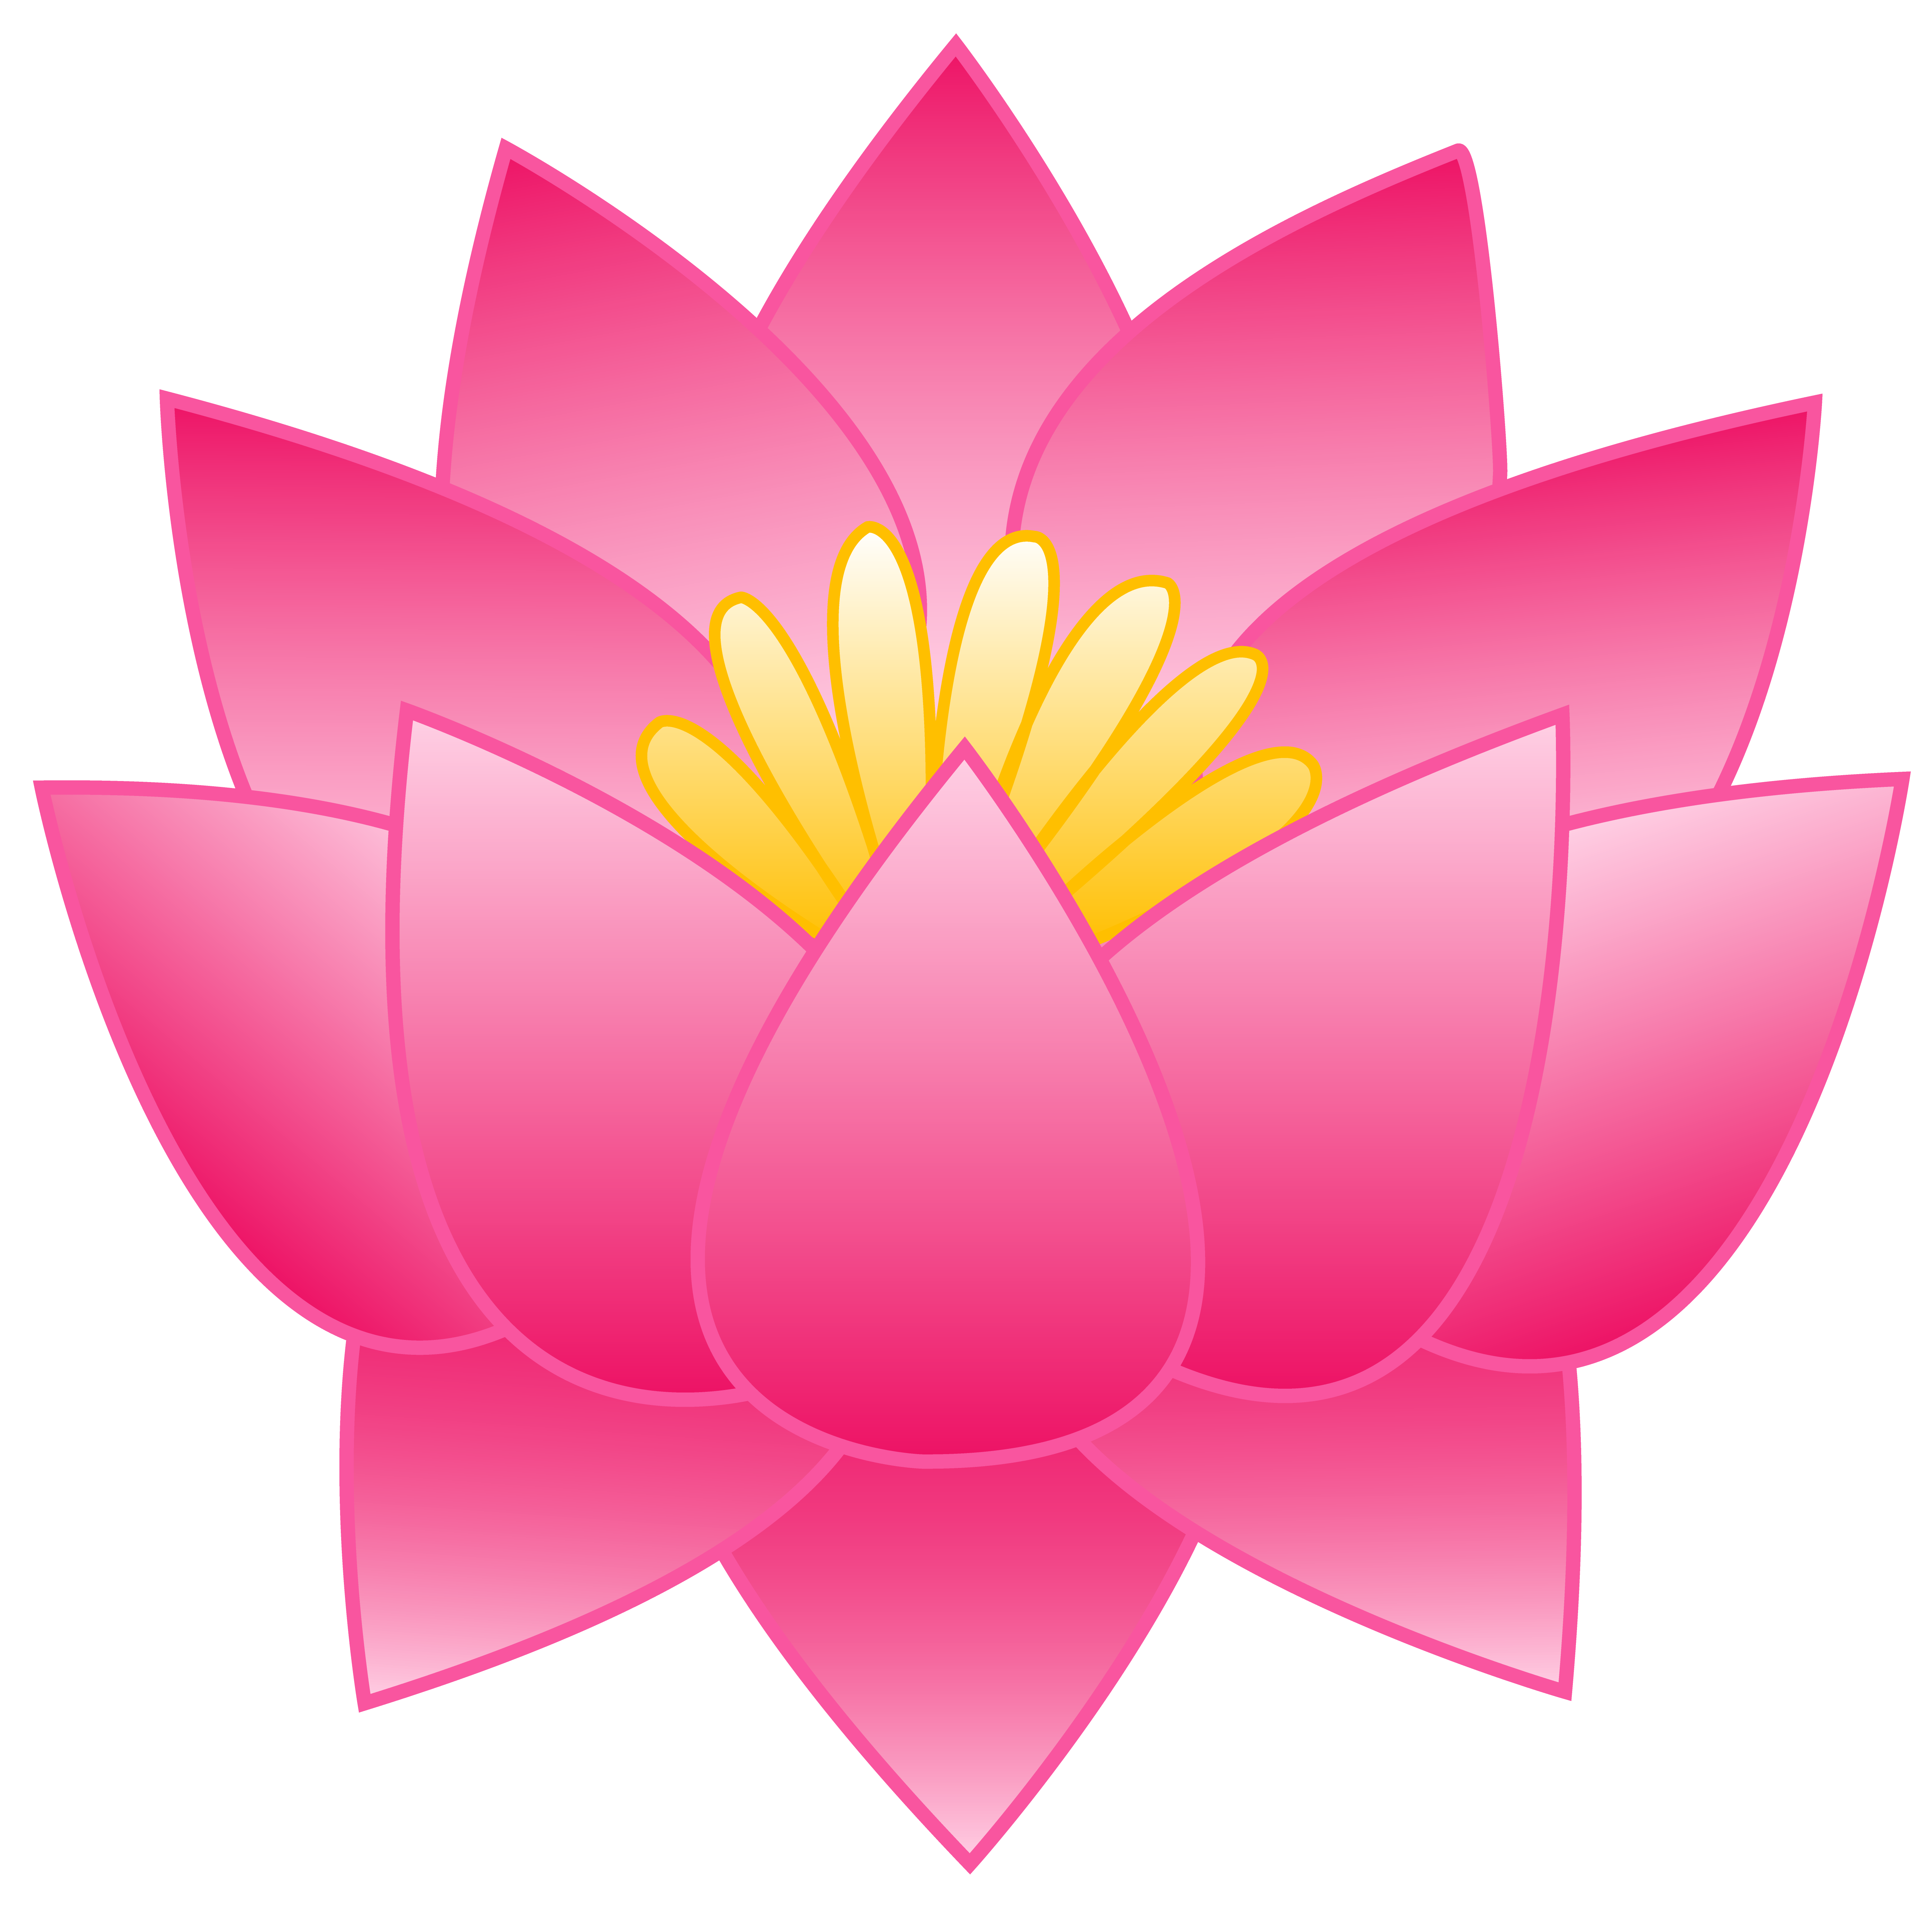 Lotus Flower Clipart | Free Download Clip Art | Free Clip Art | on ...